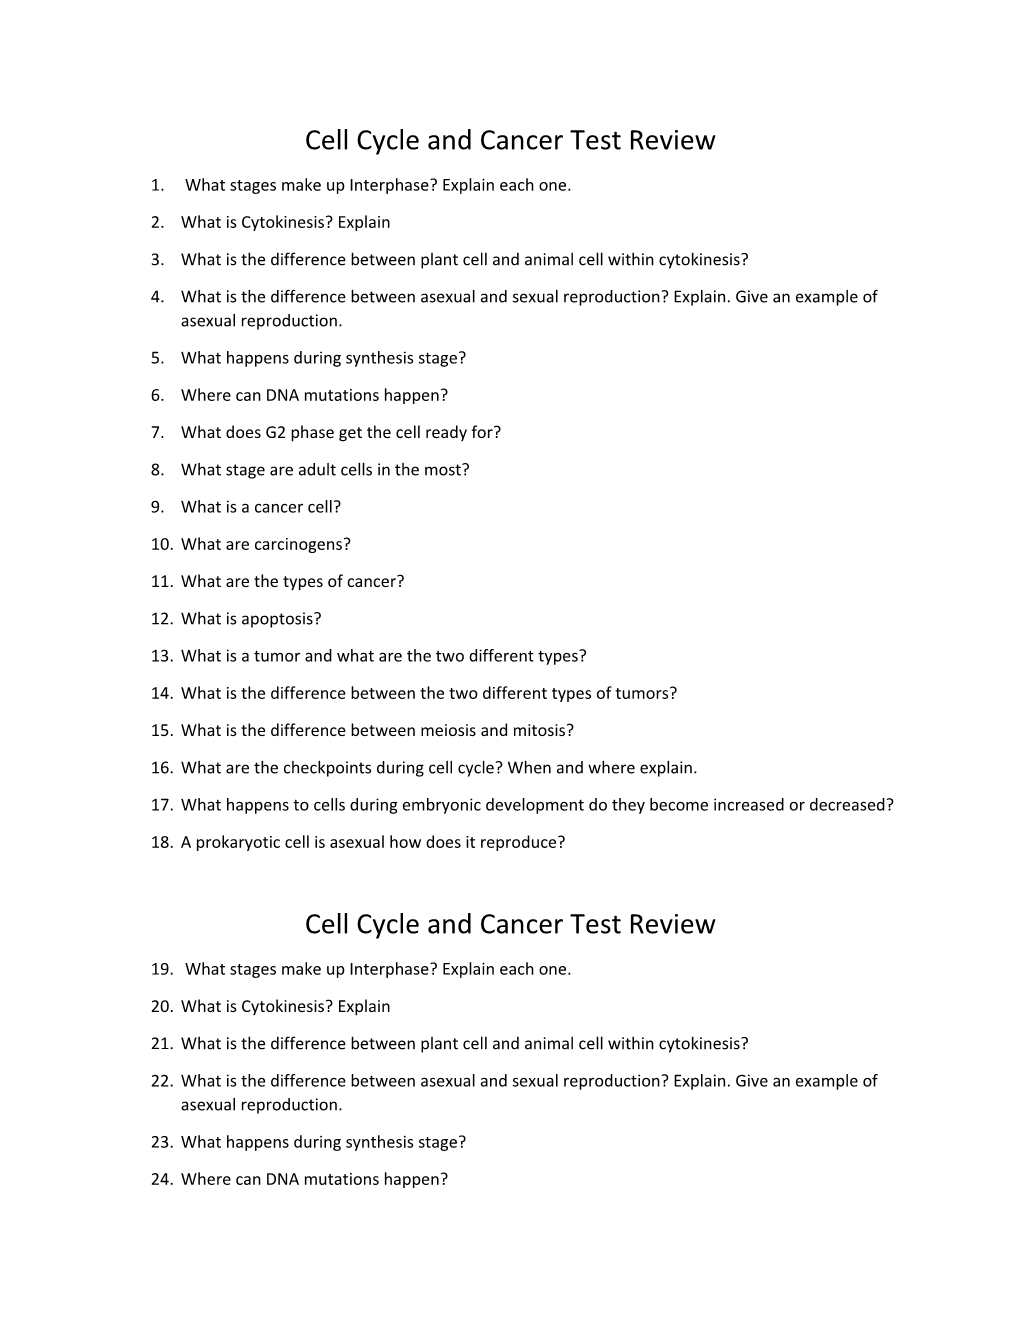 Cell Cycle and Cancer Test Review